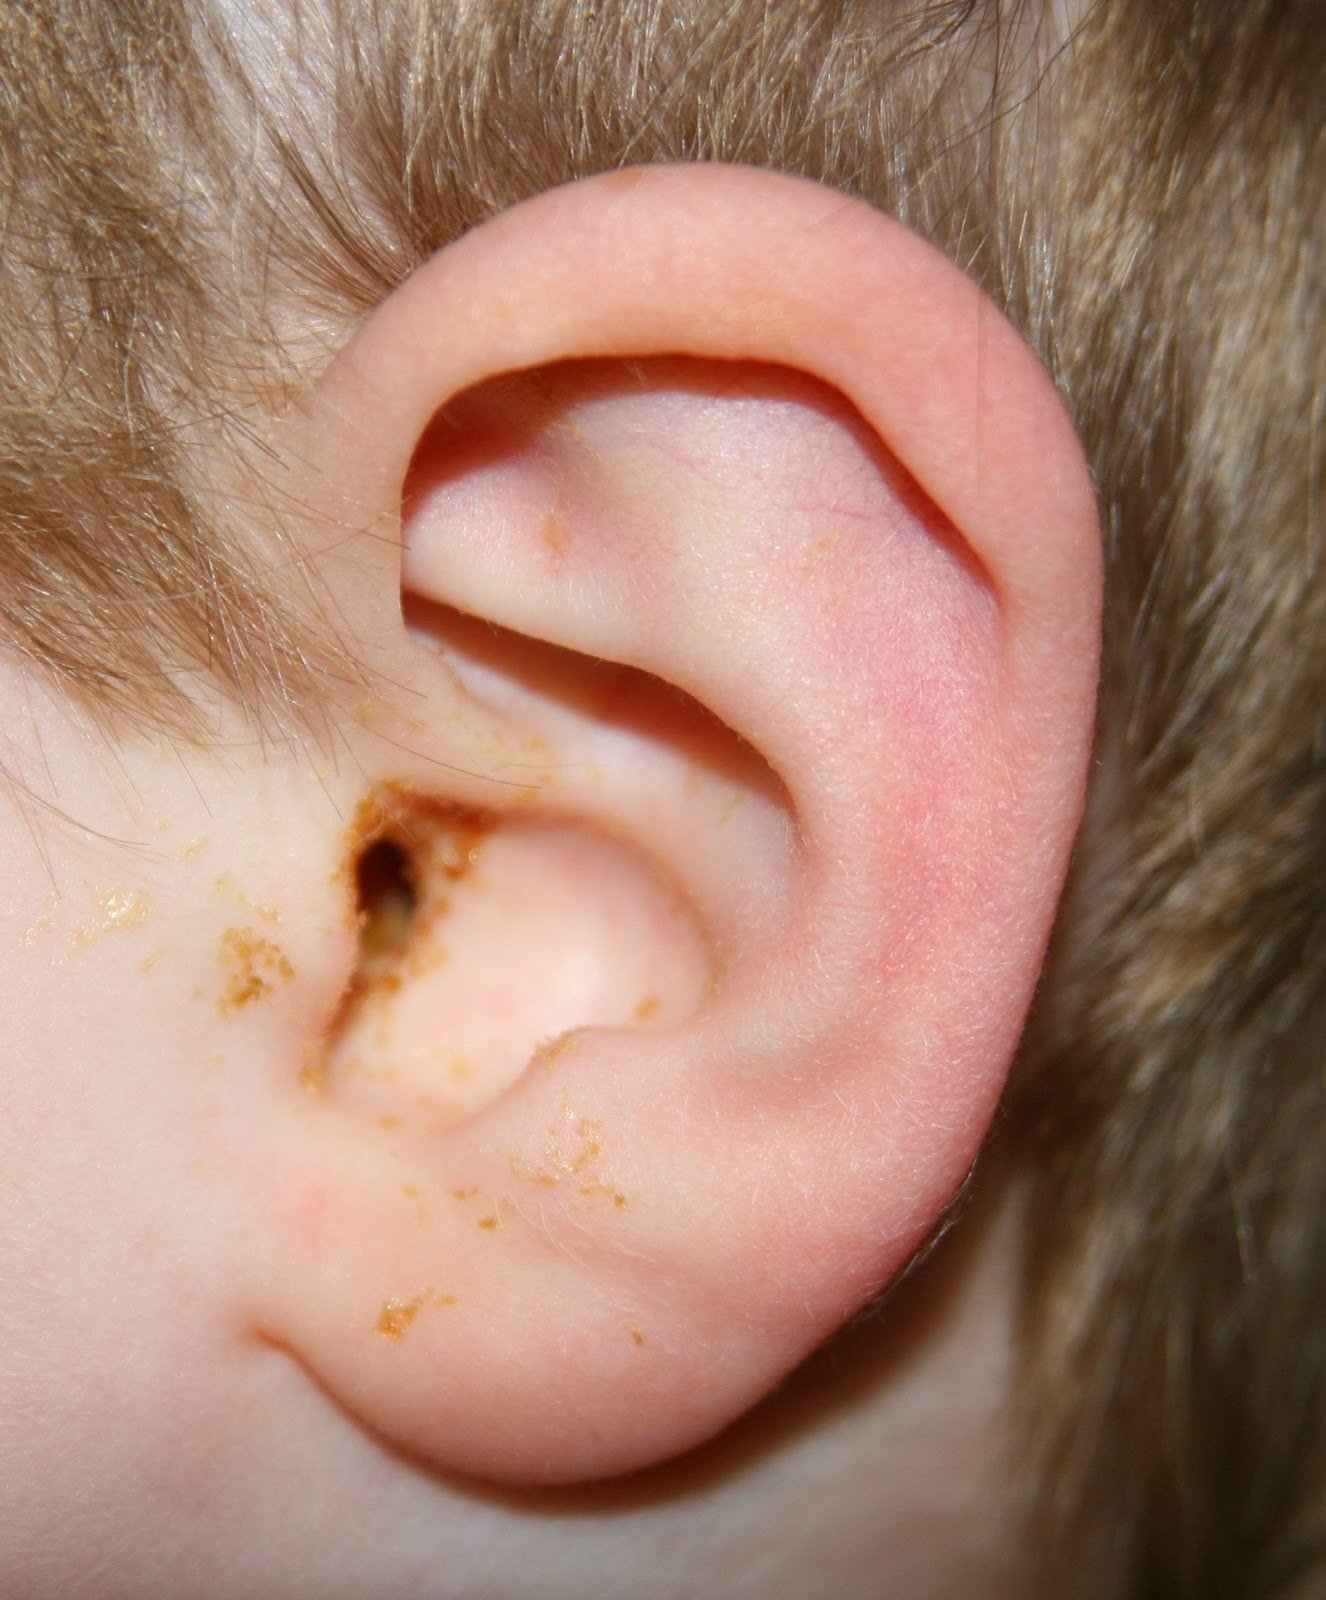 Signs of Ear Infection in Toddler